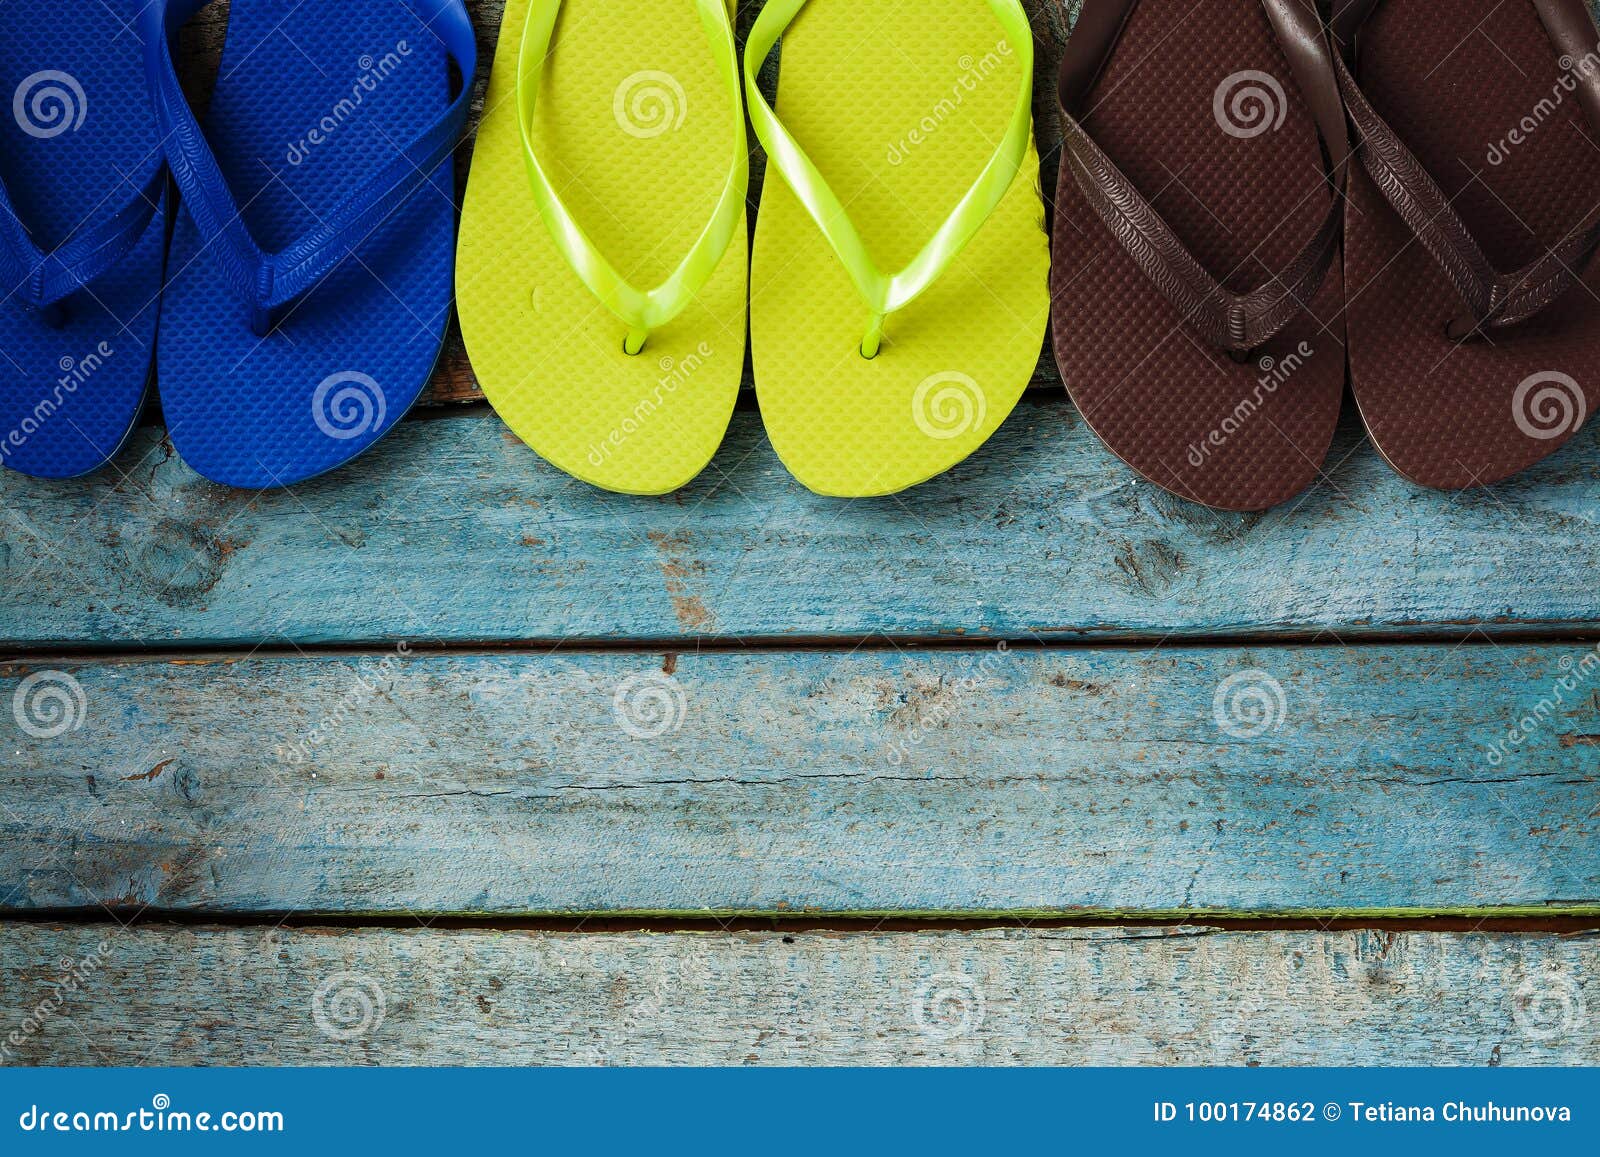 Several Pairs of Multi-colored Rubber Flip-flops Exhibited in a Stock ...